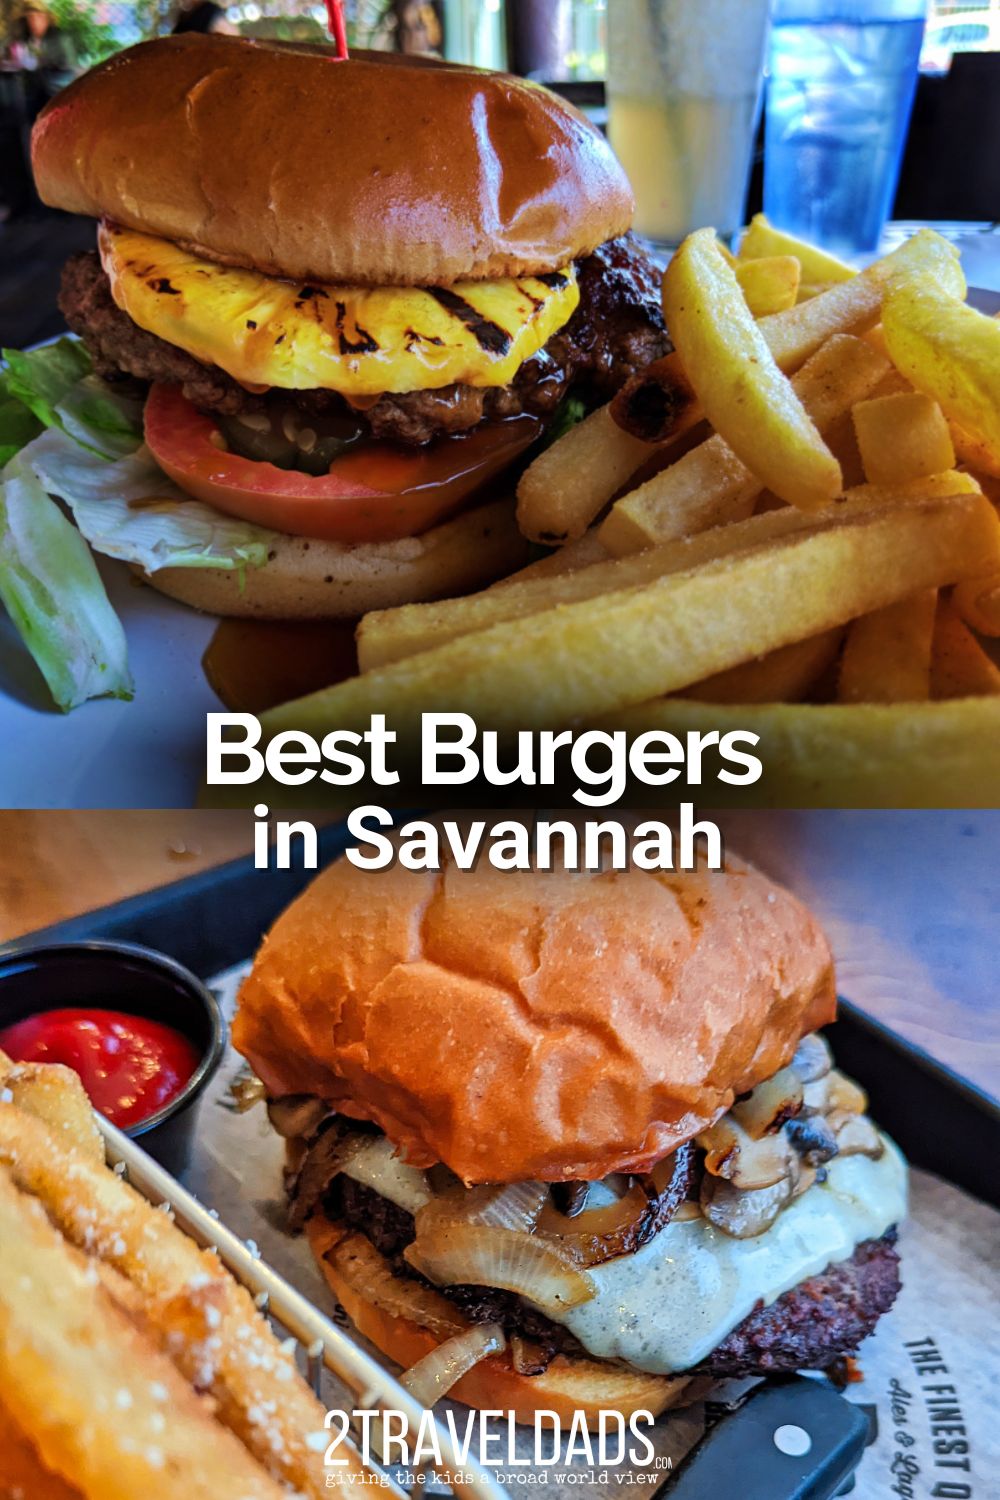 Sometimes, you just get the hankering for a nice juicy burger. With so many choices, we have narrowed down the search for the best burgers in Savannah.